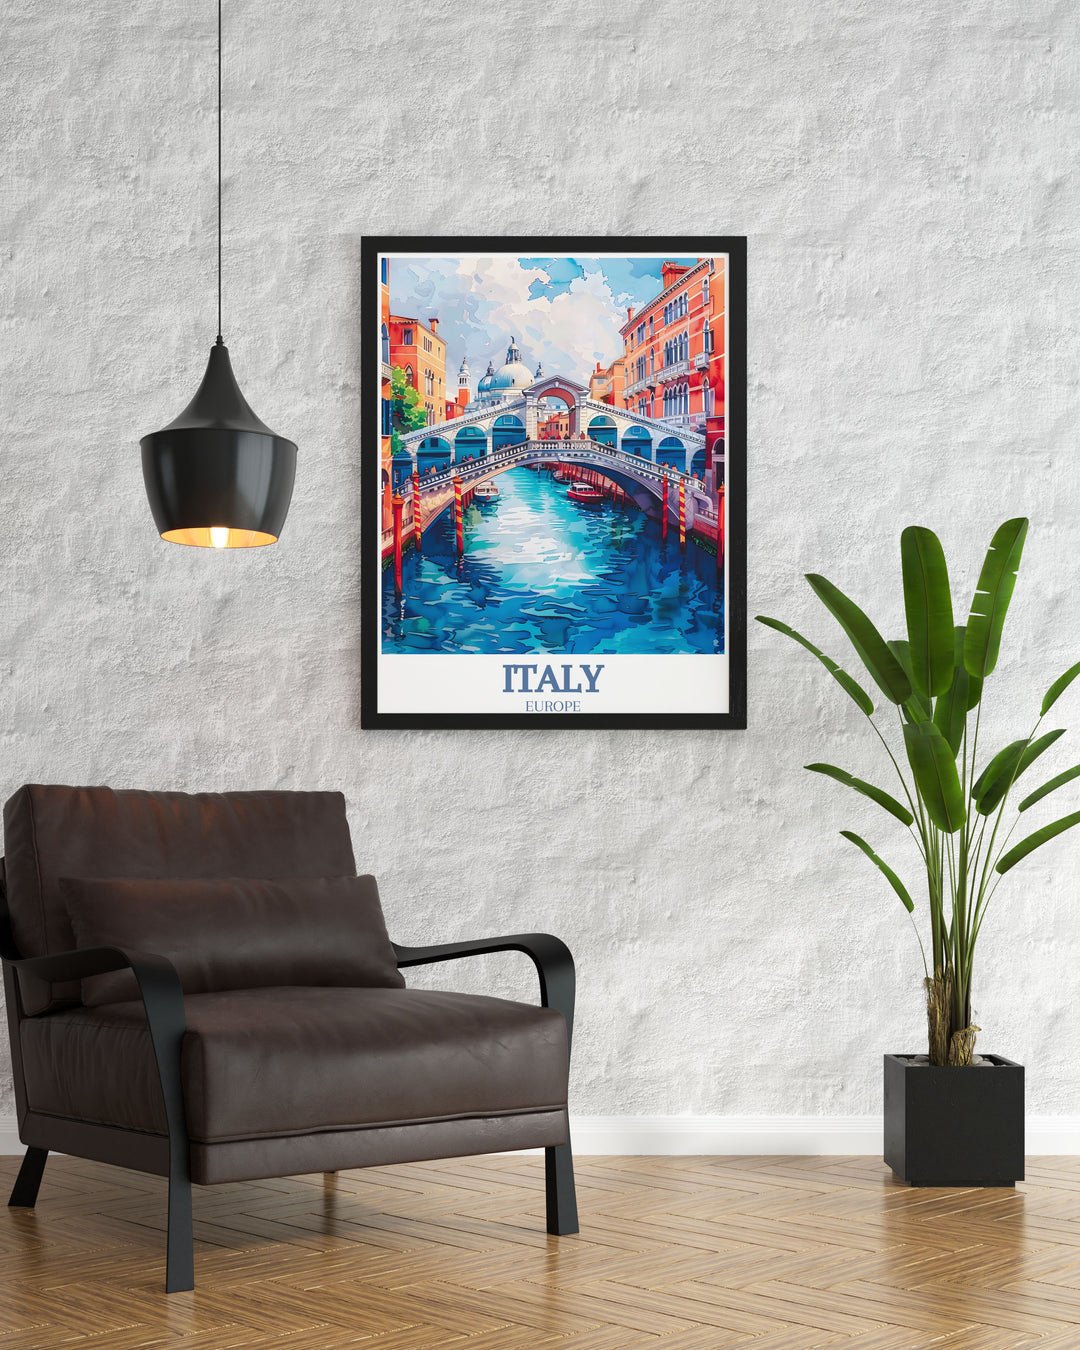 The vibrant colors and detailed architecture of the Rialto Bridge and St. Marks Basilica are captured in this poster, celebrating the artistic and historical richness of Venice.